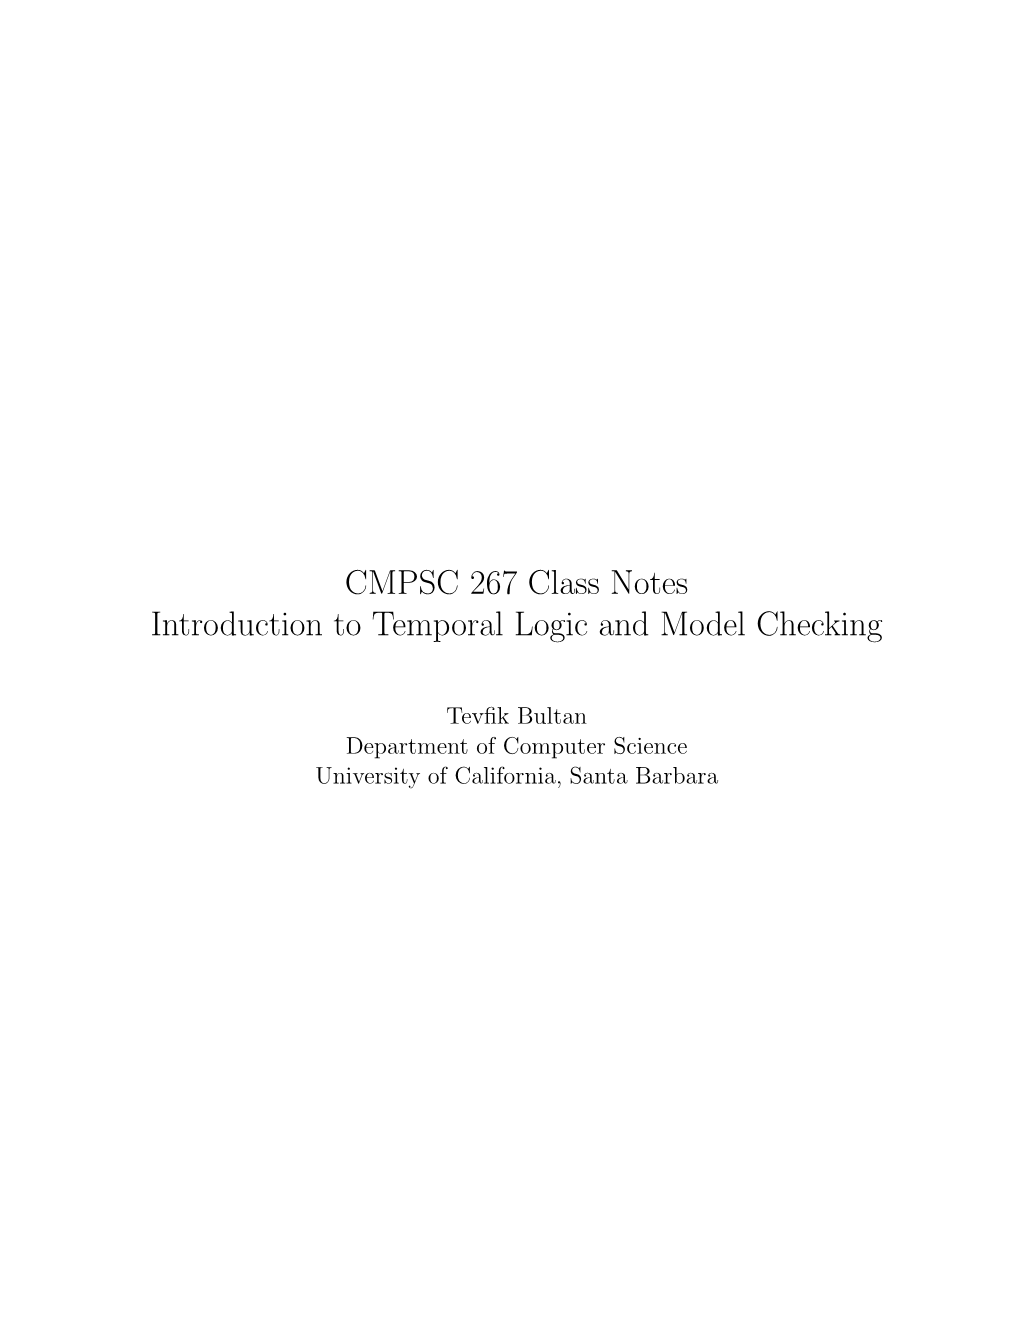 CMPSC 267 Class Notes Introduction to Temporal Logic and Model Checking